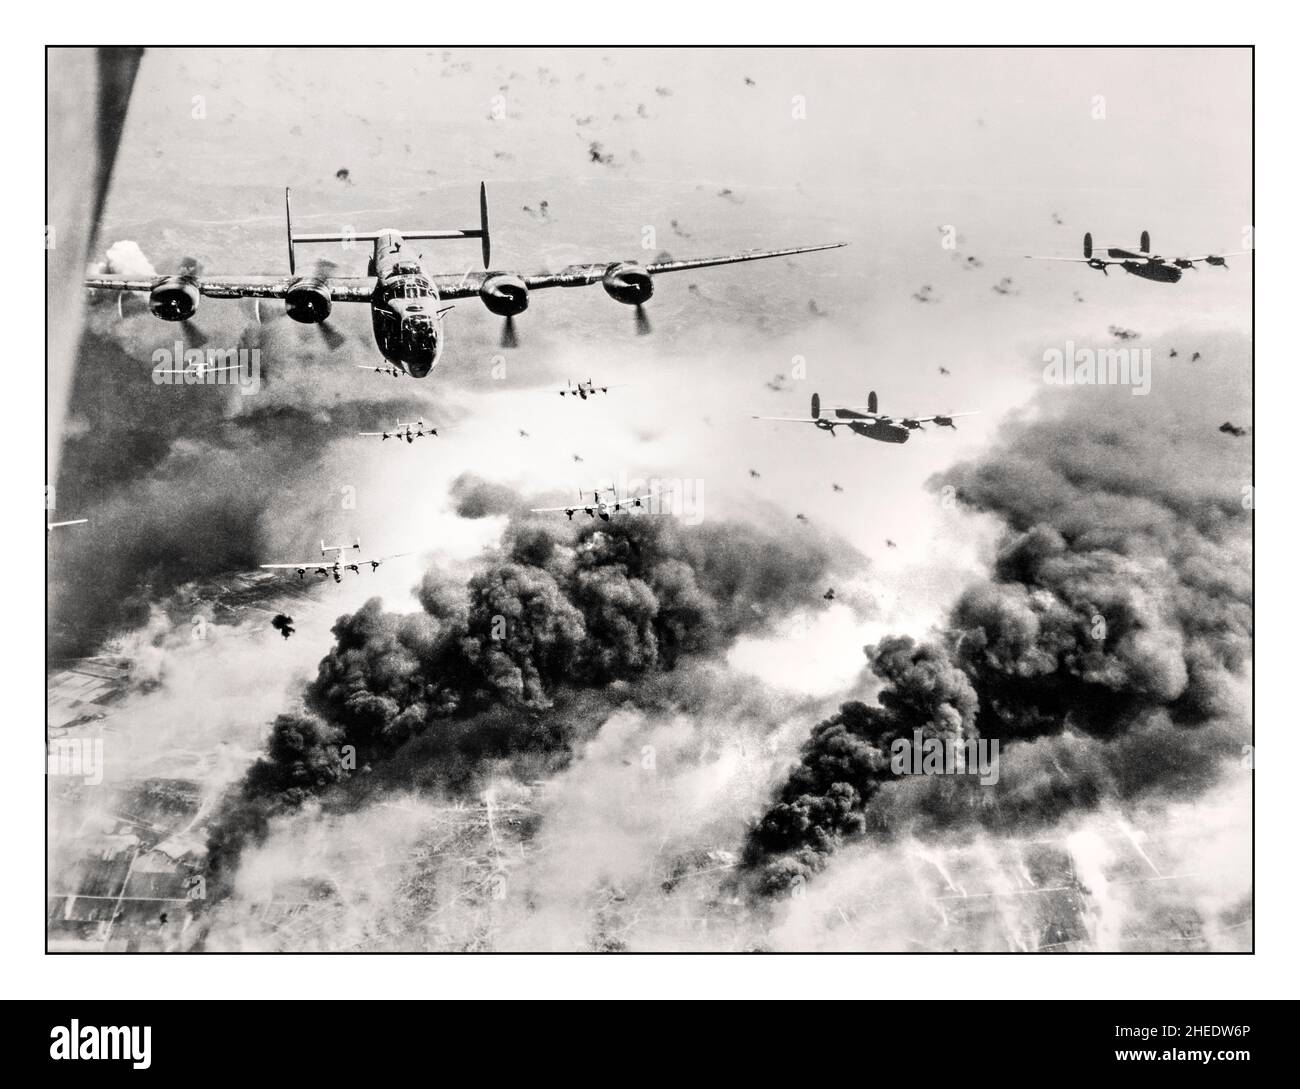 WW2 Bombing run heroic American Airforce B-24 Liberators flying through flak and over the destruction created by waves of bombers, 15th Air Force B-24s leave Ploieşti, Romania, after one of many attacks against the leading oil refinery target in continental Europe. (U.S. Air Force photo) LOC caption: 'Waves of Consolidated B-24 liberators of the 15th AAF fly over the target area, the Concordia Vega Oil refinery, Ploești, Romania, with bursting flak, after dropping their bomb loads on the oil plant,  31 May '44'  The  mission was deemed a success, though 54 of the 177 bombers didn't return Stock Photo